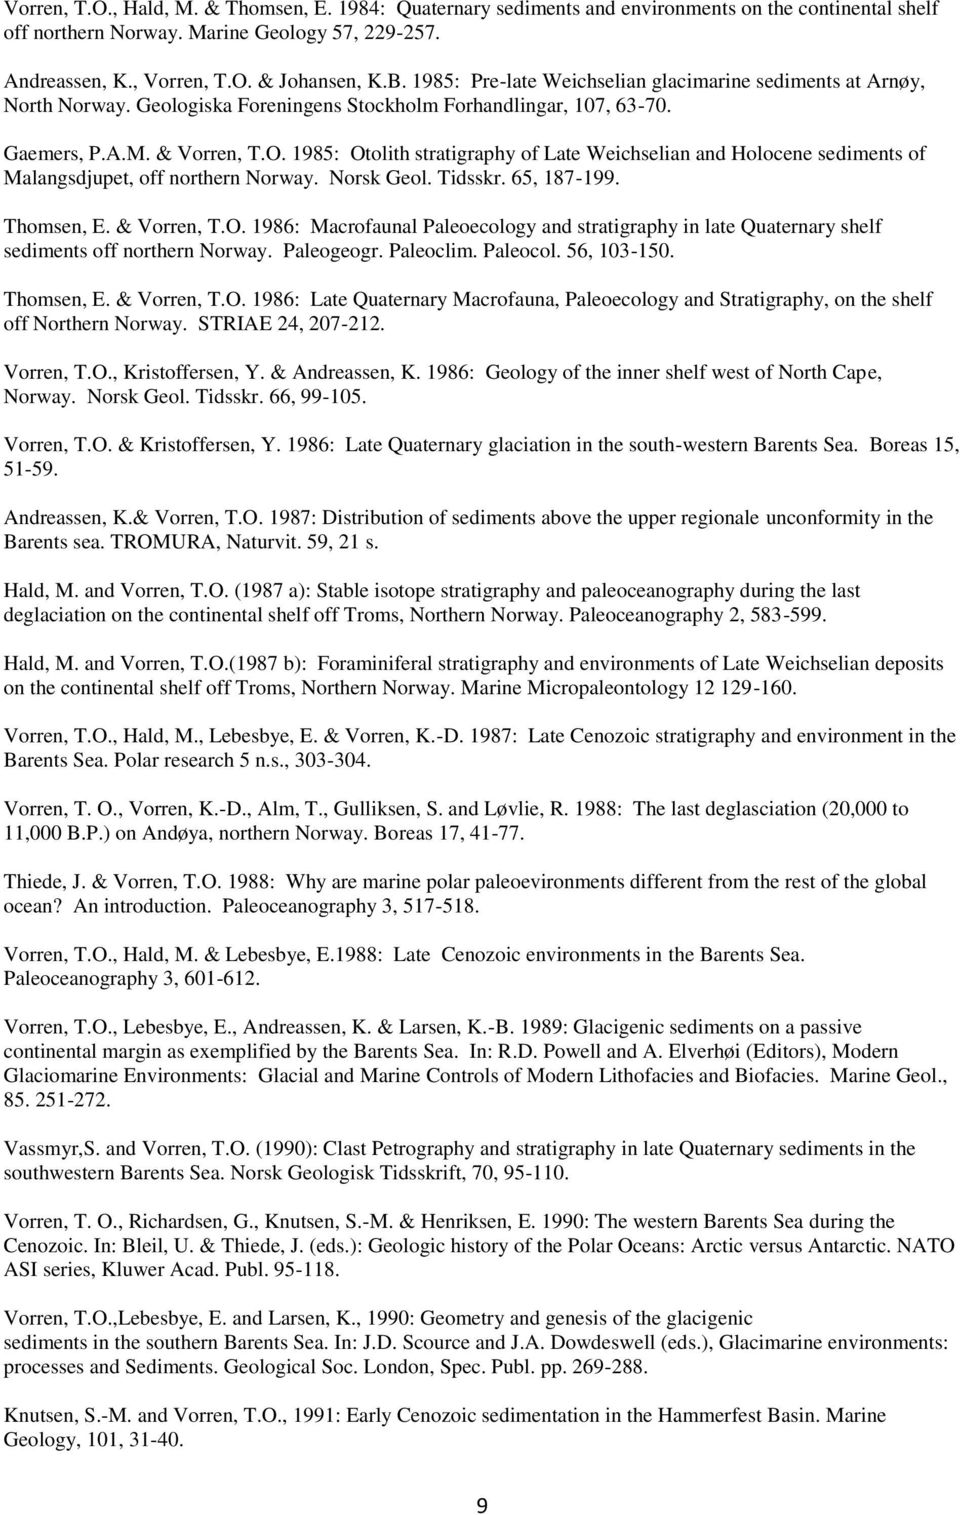 1985: Otolith stratigraphy of Late Weichselian and Holocene sediments of Malangsdjupet, off northern Norway. Norsk Geol. Tidsskr. 65, 187-199. Thomsen, E. & Vorren, T.O. 1986: Macrofaunal Paleoecology and stratigraphy in late Quaternary shelf sediments off northern Norway.